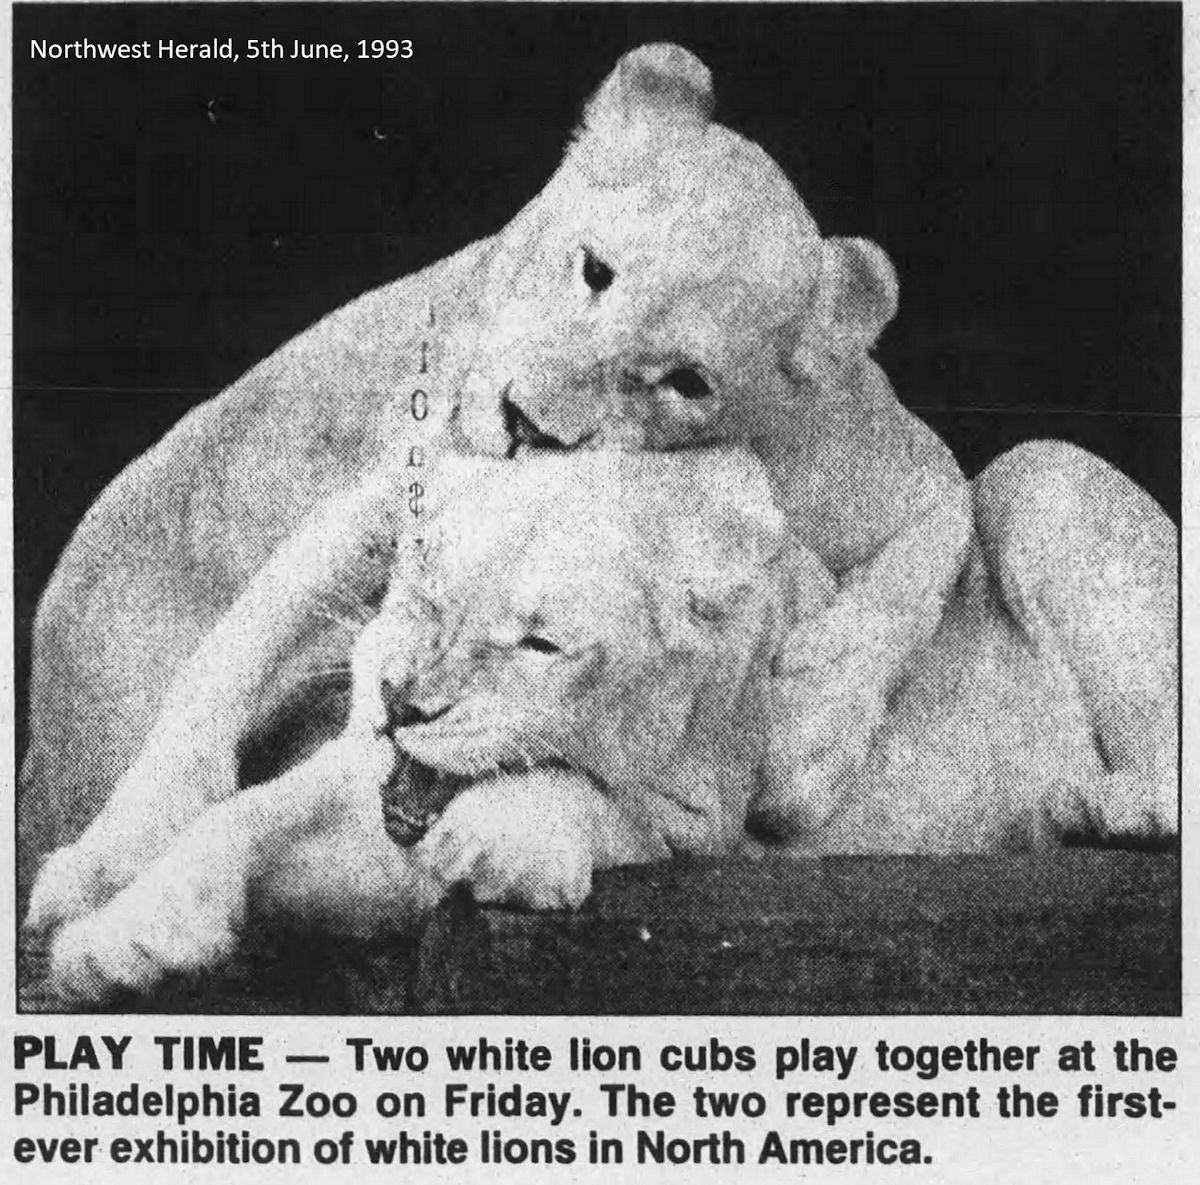 WHITE LIONS IN CAPTIVITY TODAY